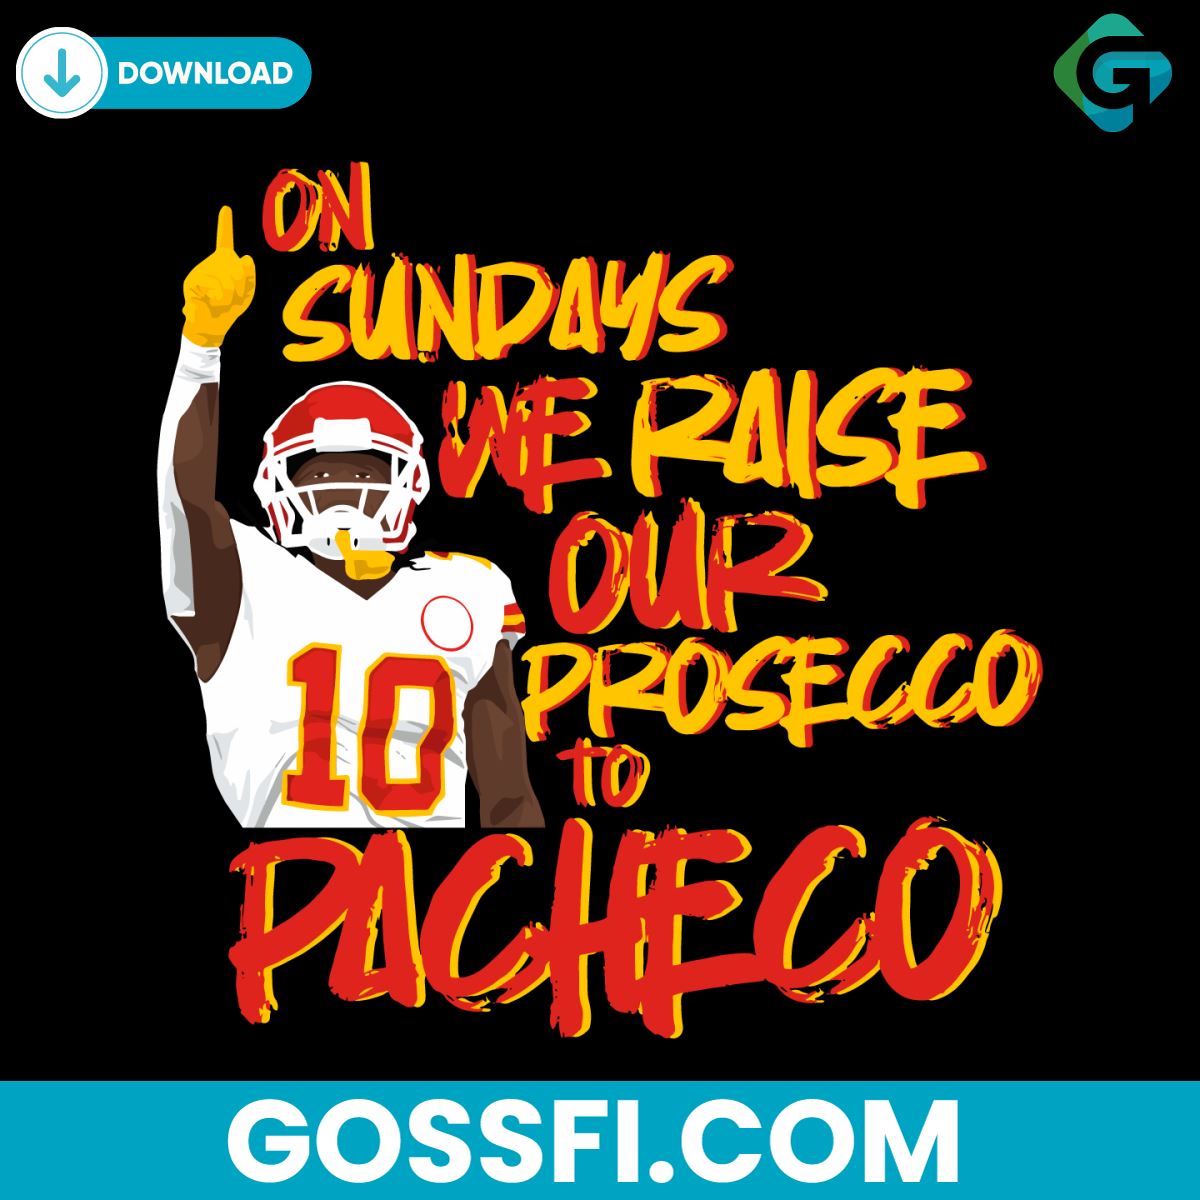 kc-chiefs-on-sunday-we-raise-our-prosecco-to-pacheco-svg